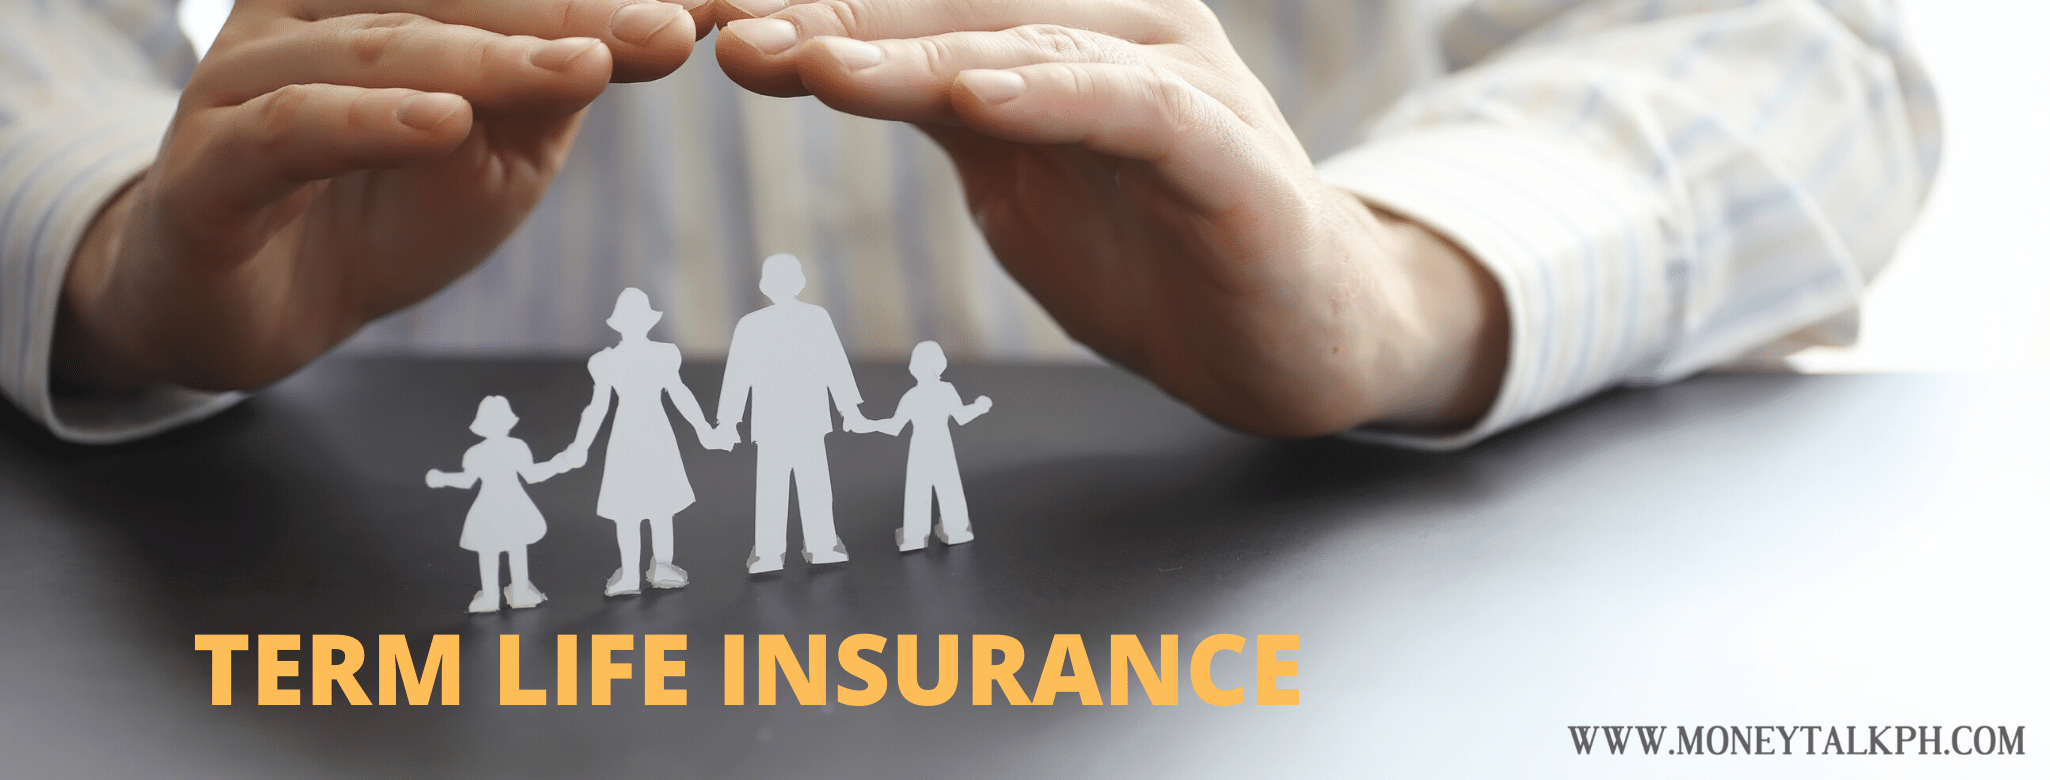 Best and Cheapest Term Insurance Plans in the Philippines ...